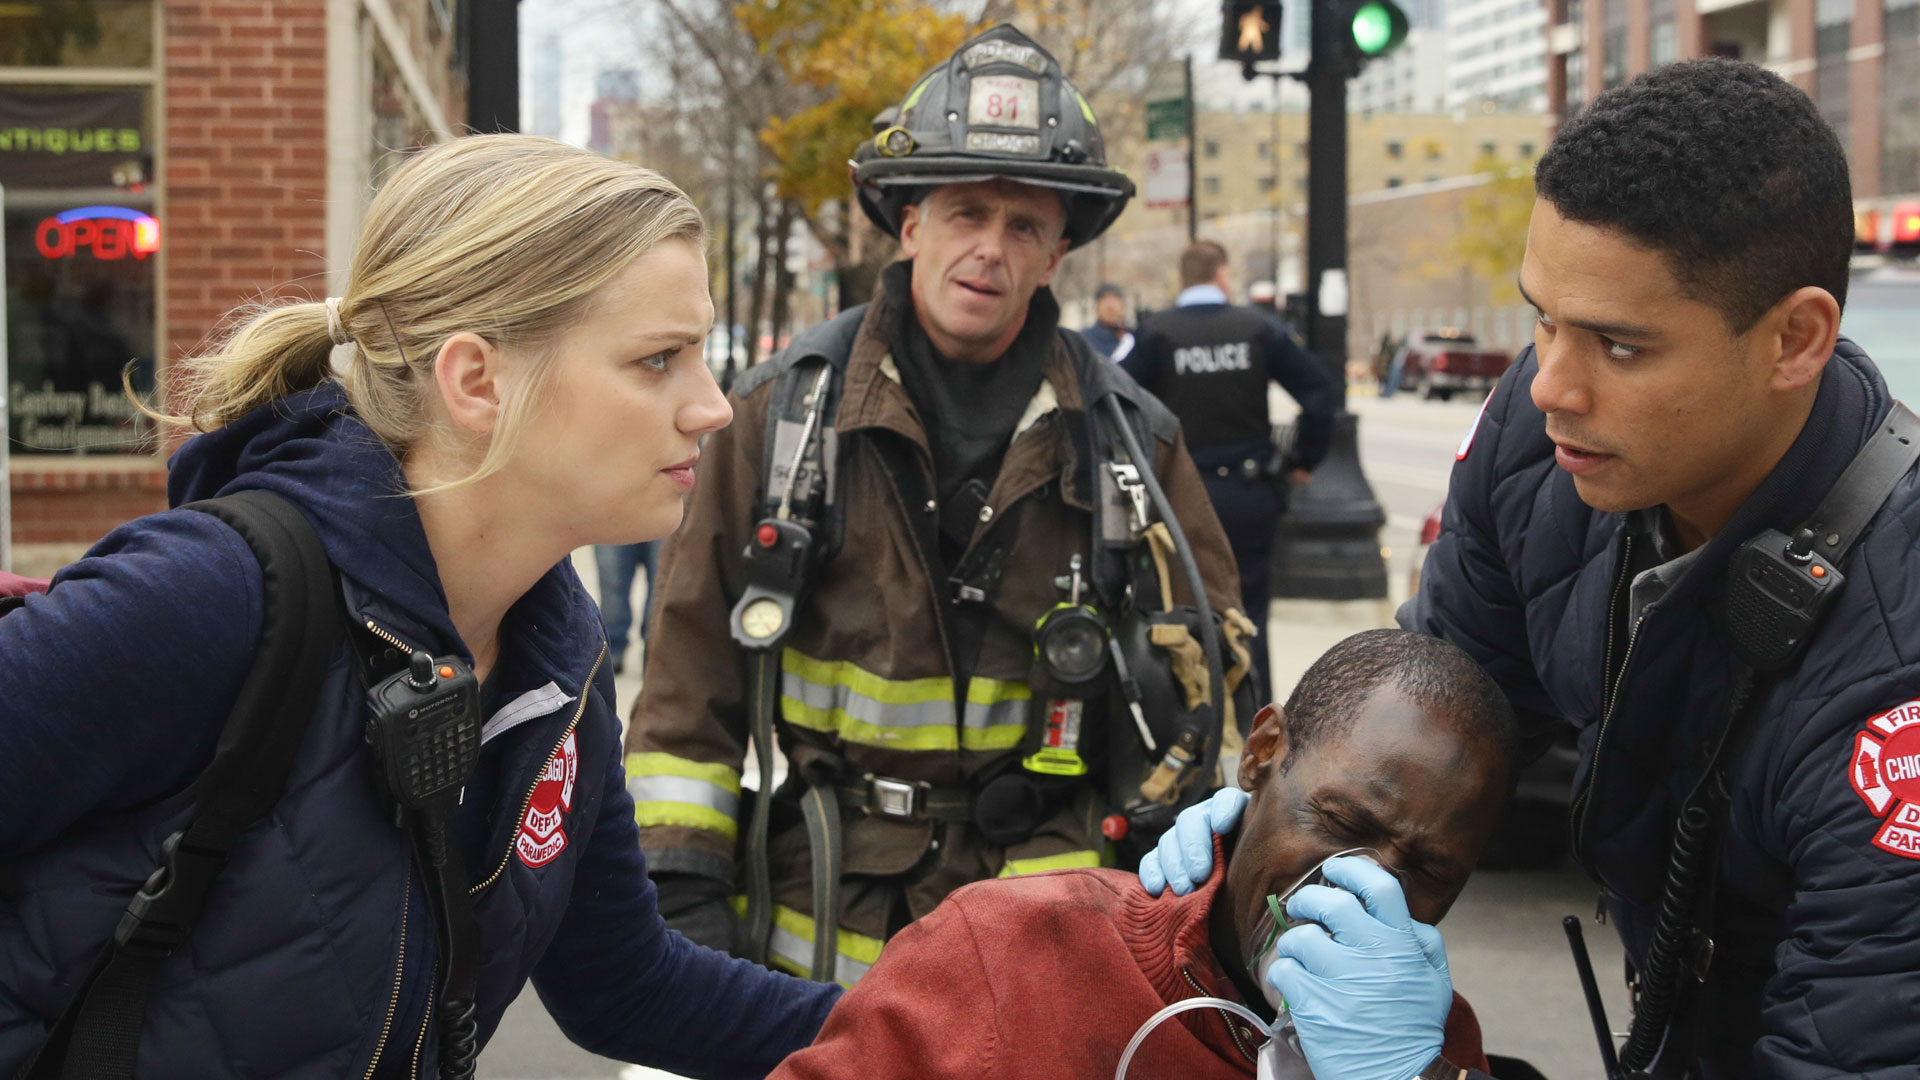 Watch Arrest in Transit (Season 3, Episode 9) of Chicago Fire or get ep...